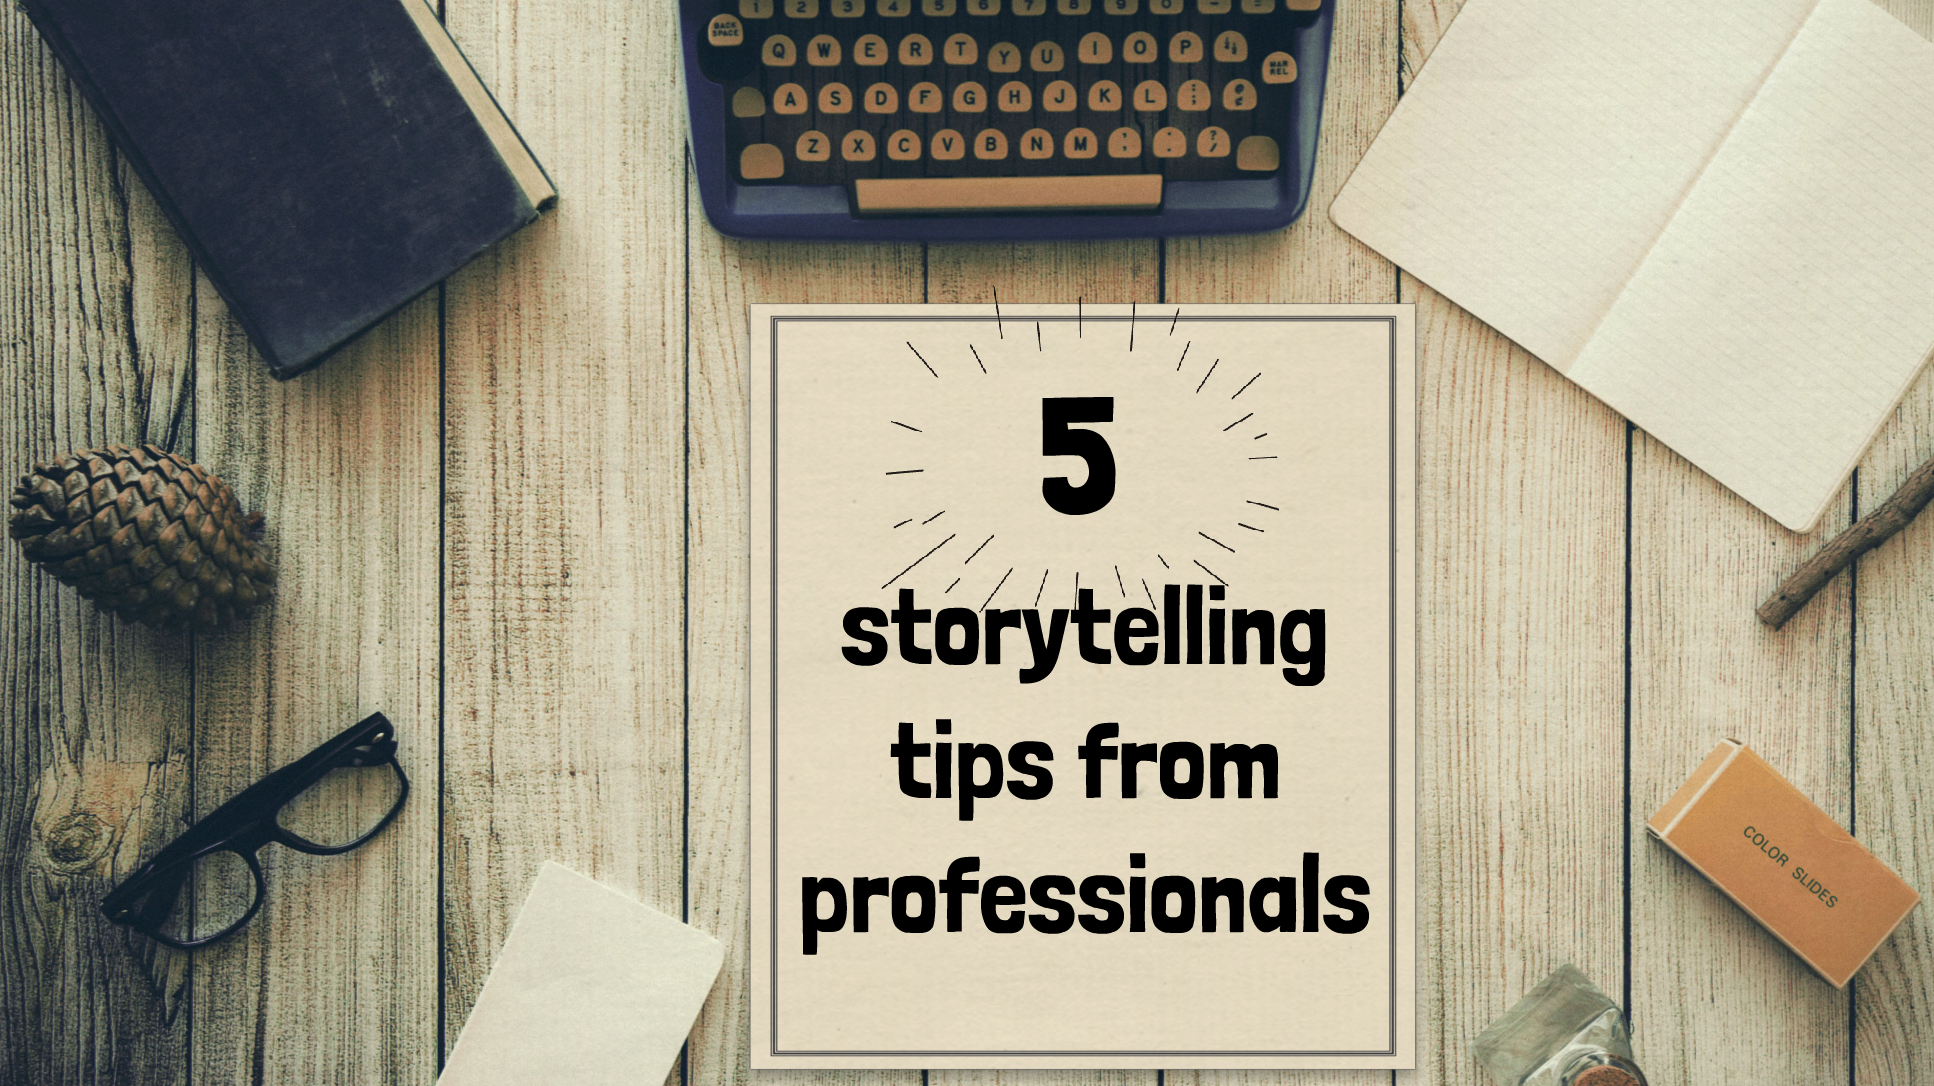 5 Storytelling tips from professionals